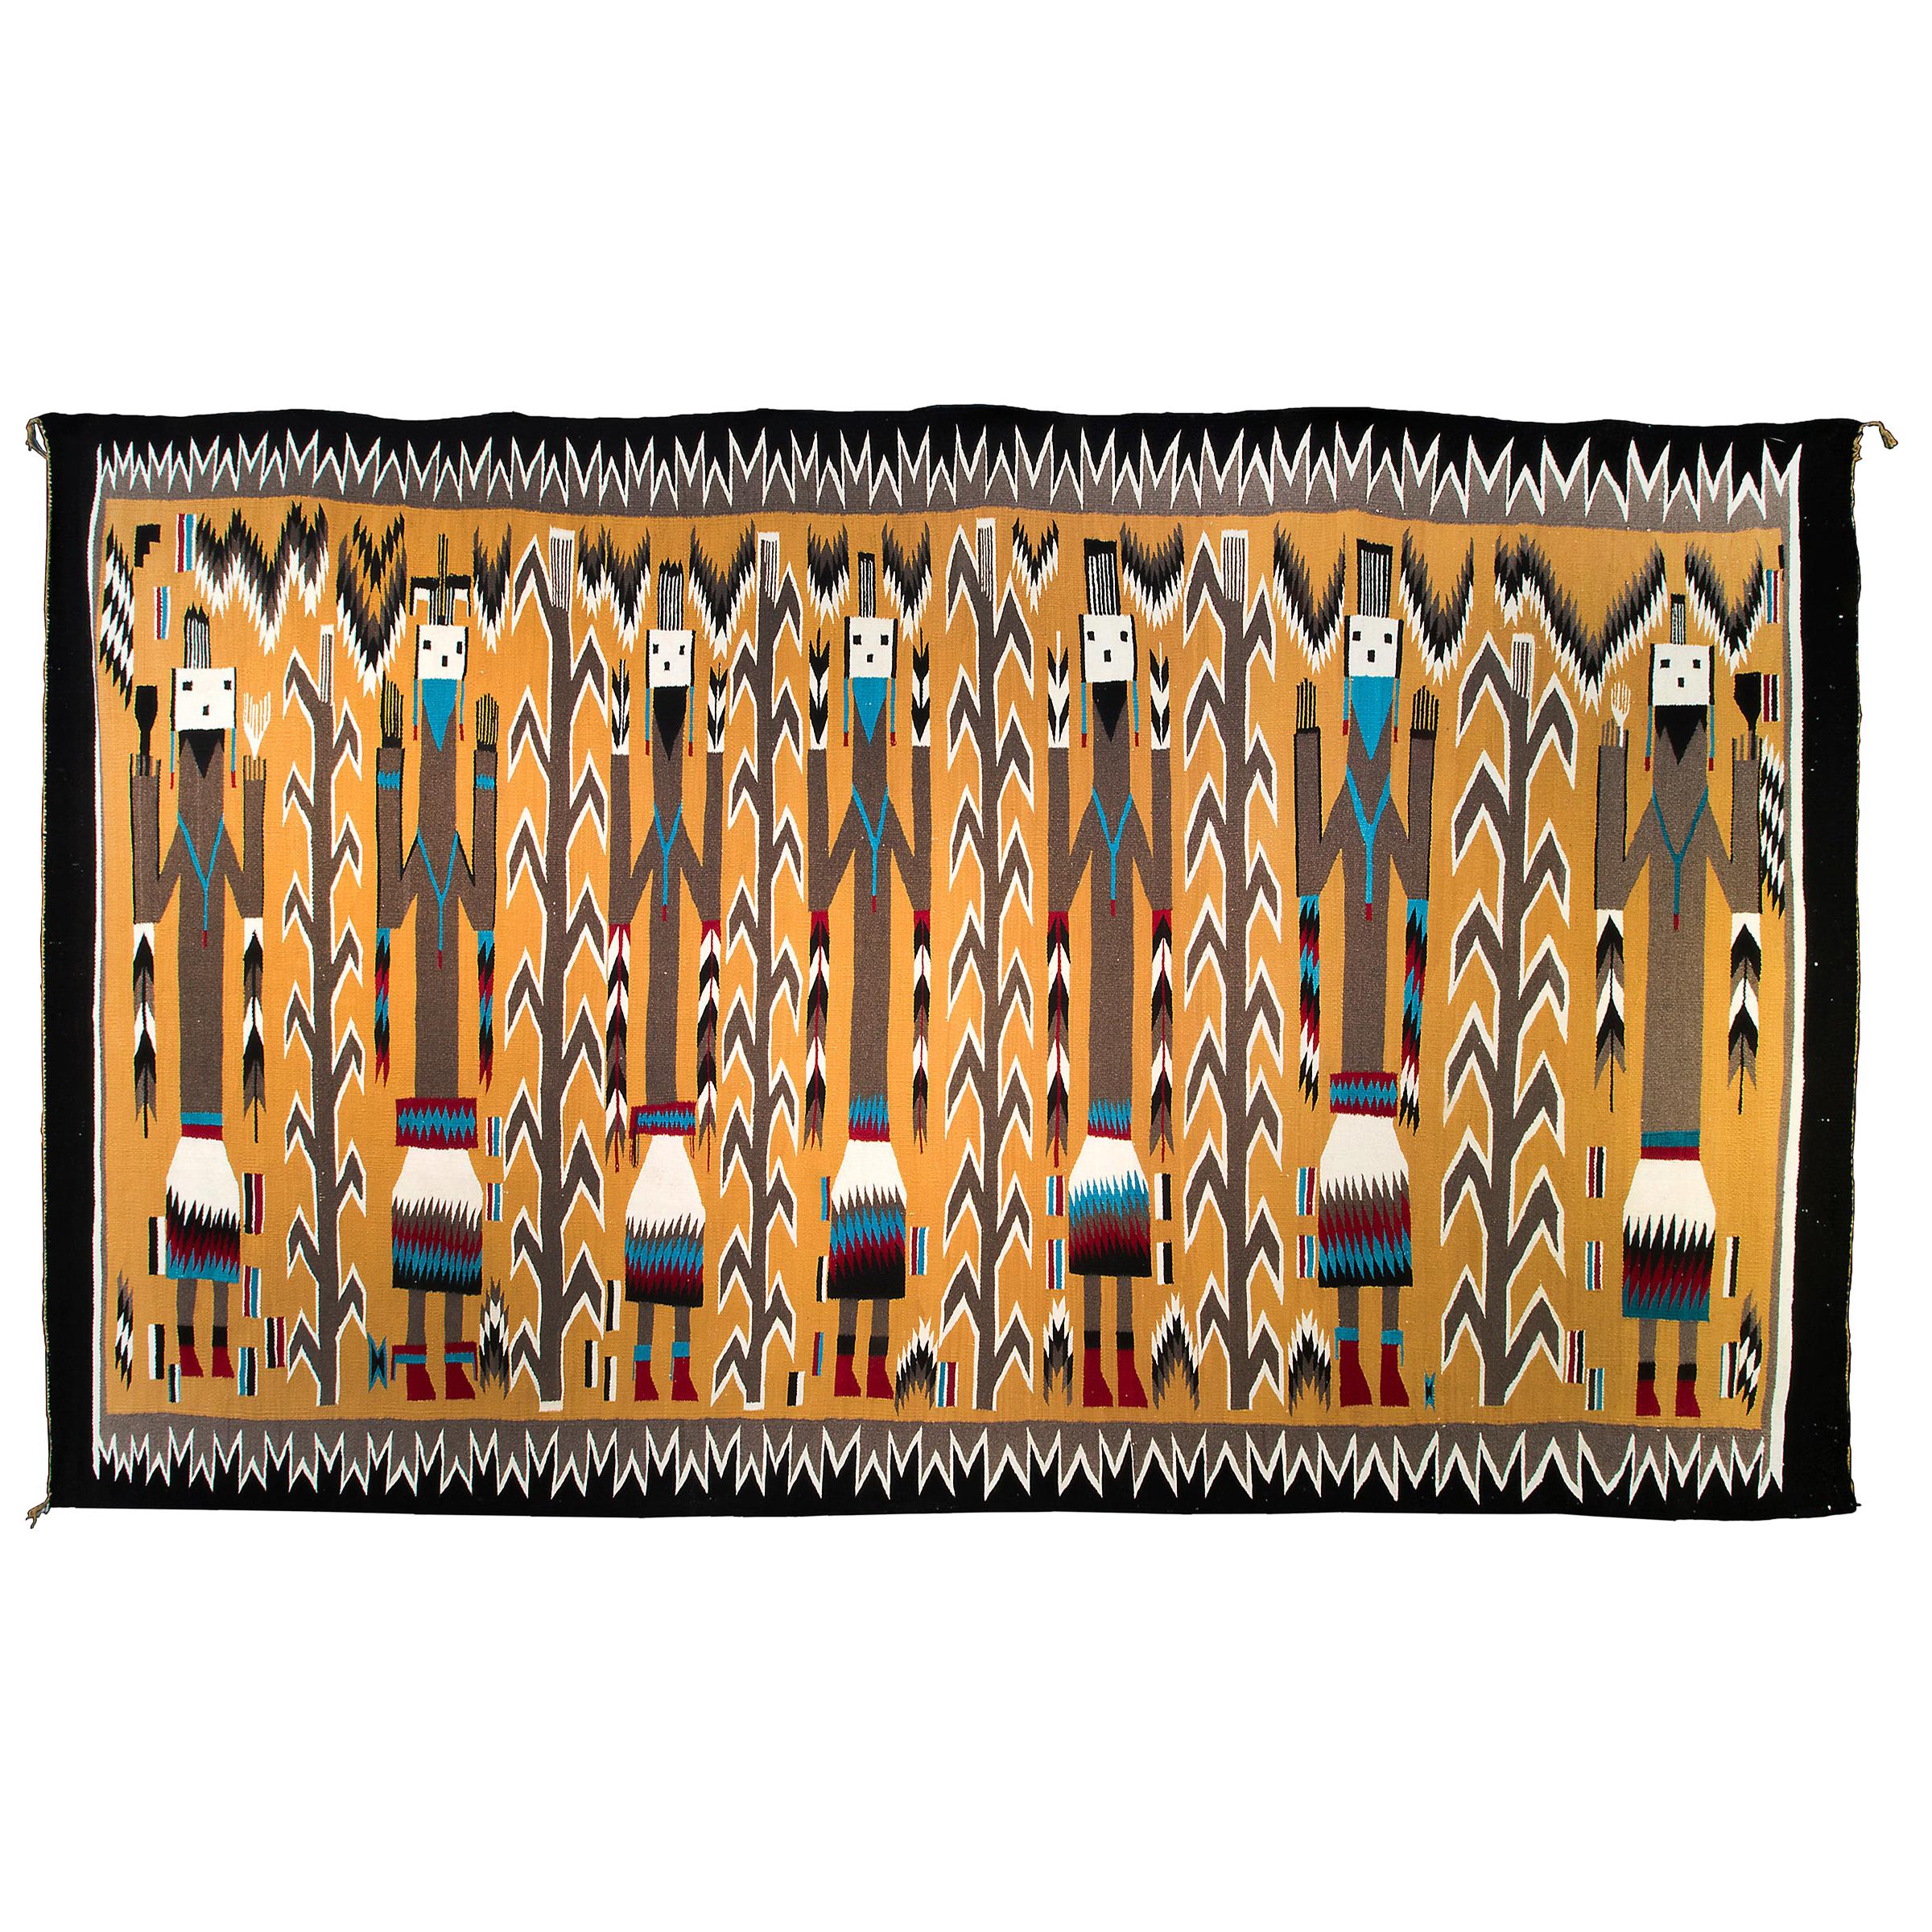 Navajo Rug, Pictorial Yei Weaving, circa 1950, Yellow, Black, White, Blue, Red For Sale